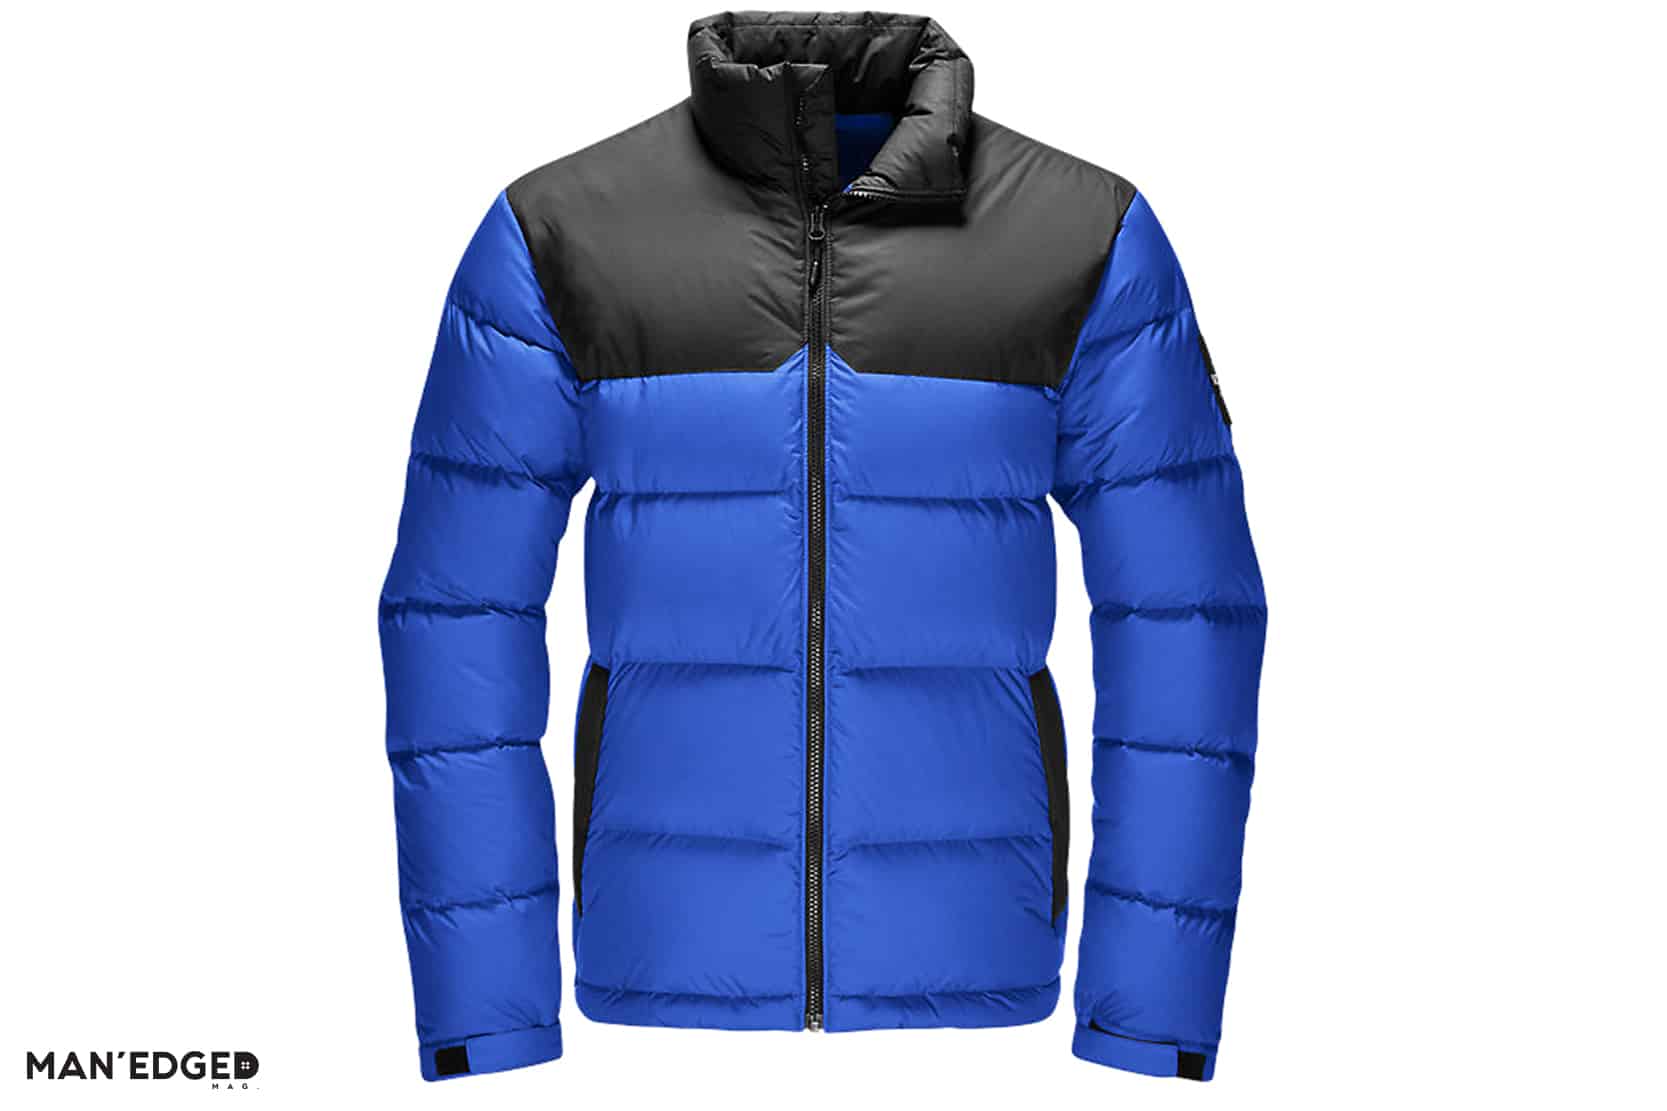 Gift ideas for the streetwear snob featuring the men's NUPTSE jacket by North Face